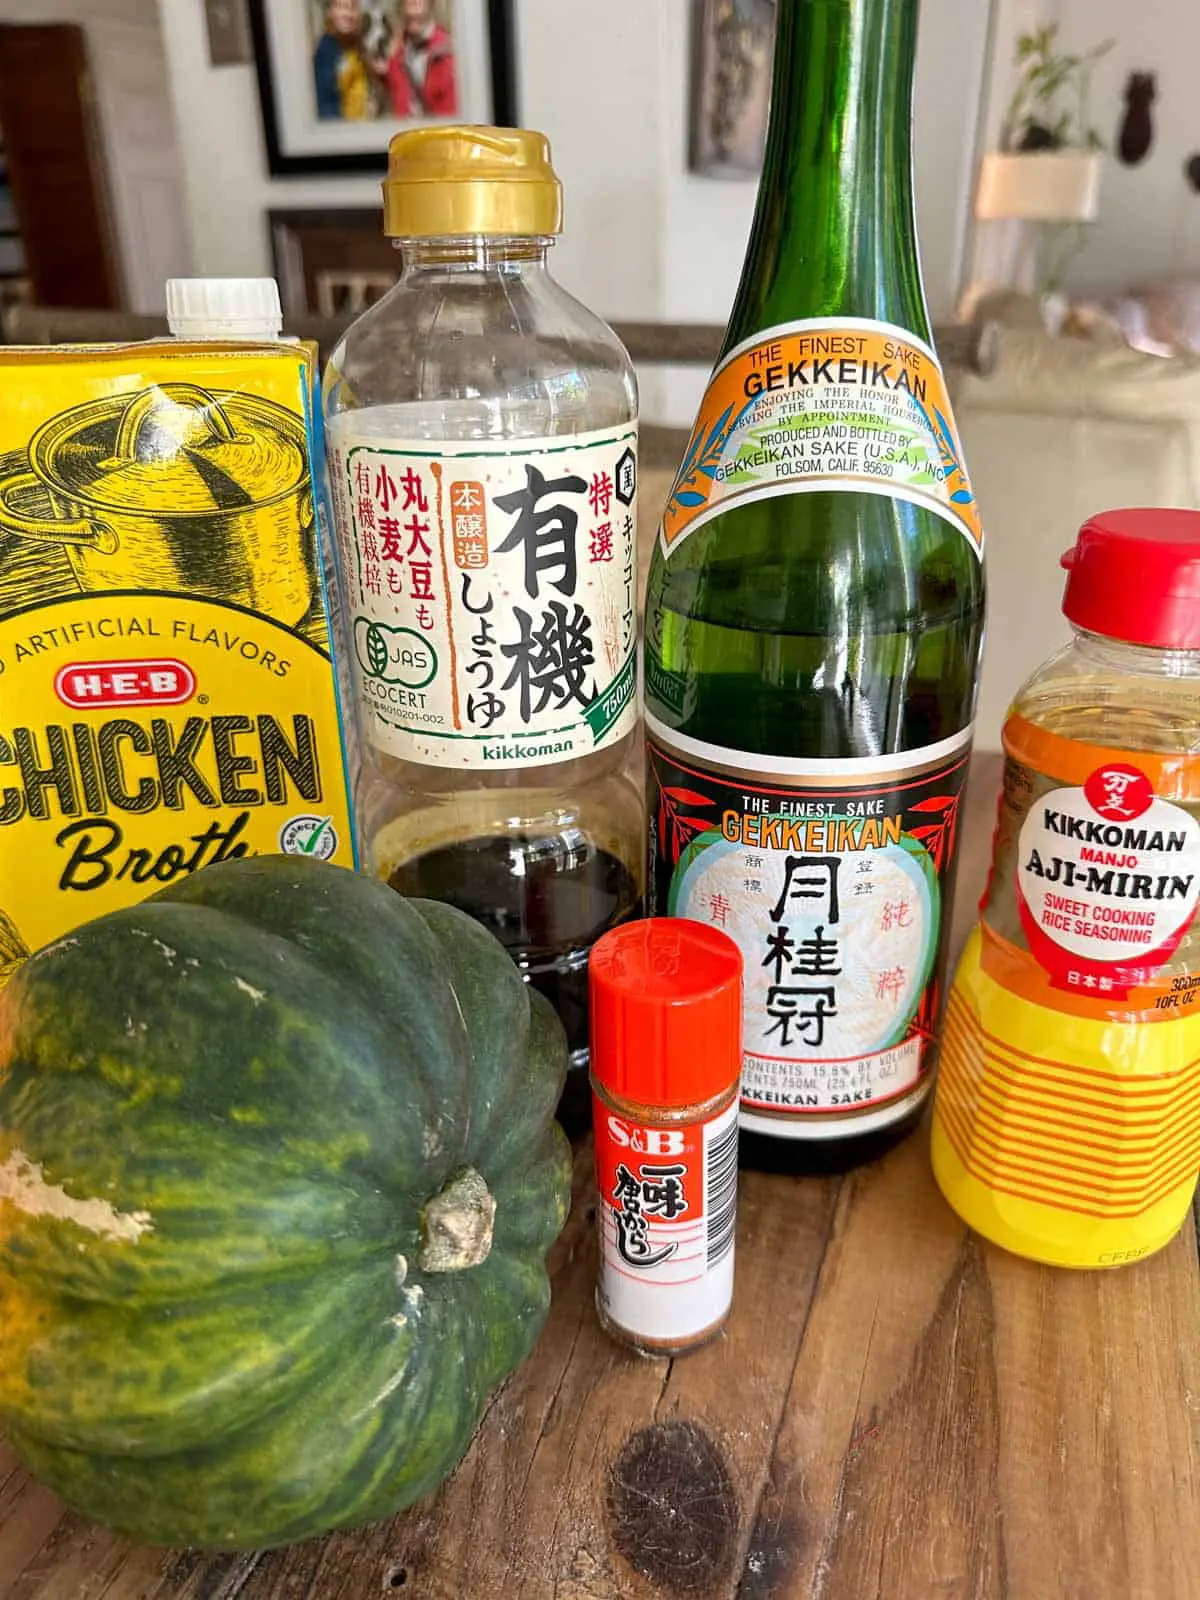 An acorn squash, carton of chicken broth, bottle of soy sauce, bottle of sake, mirin, and Ichimi Togarashi Japanese Chili Pepper on a wooden table.